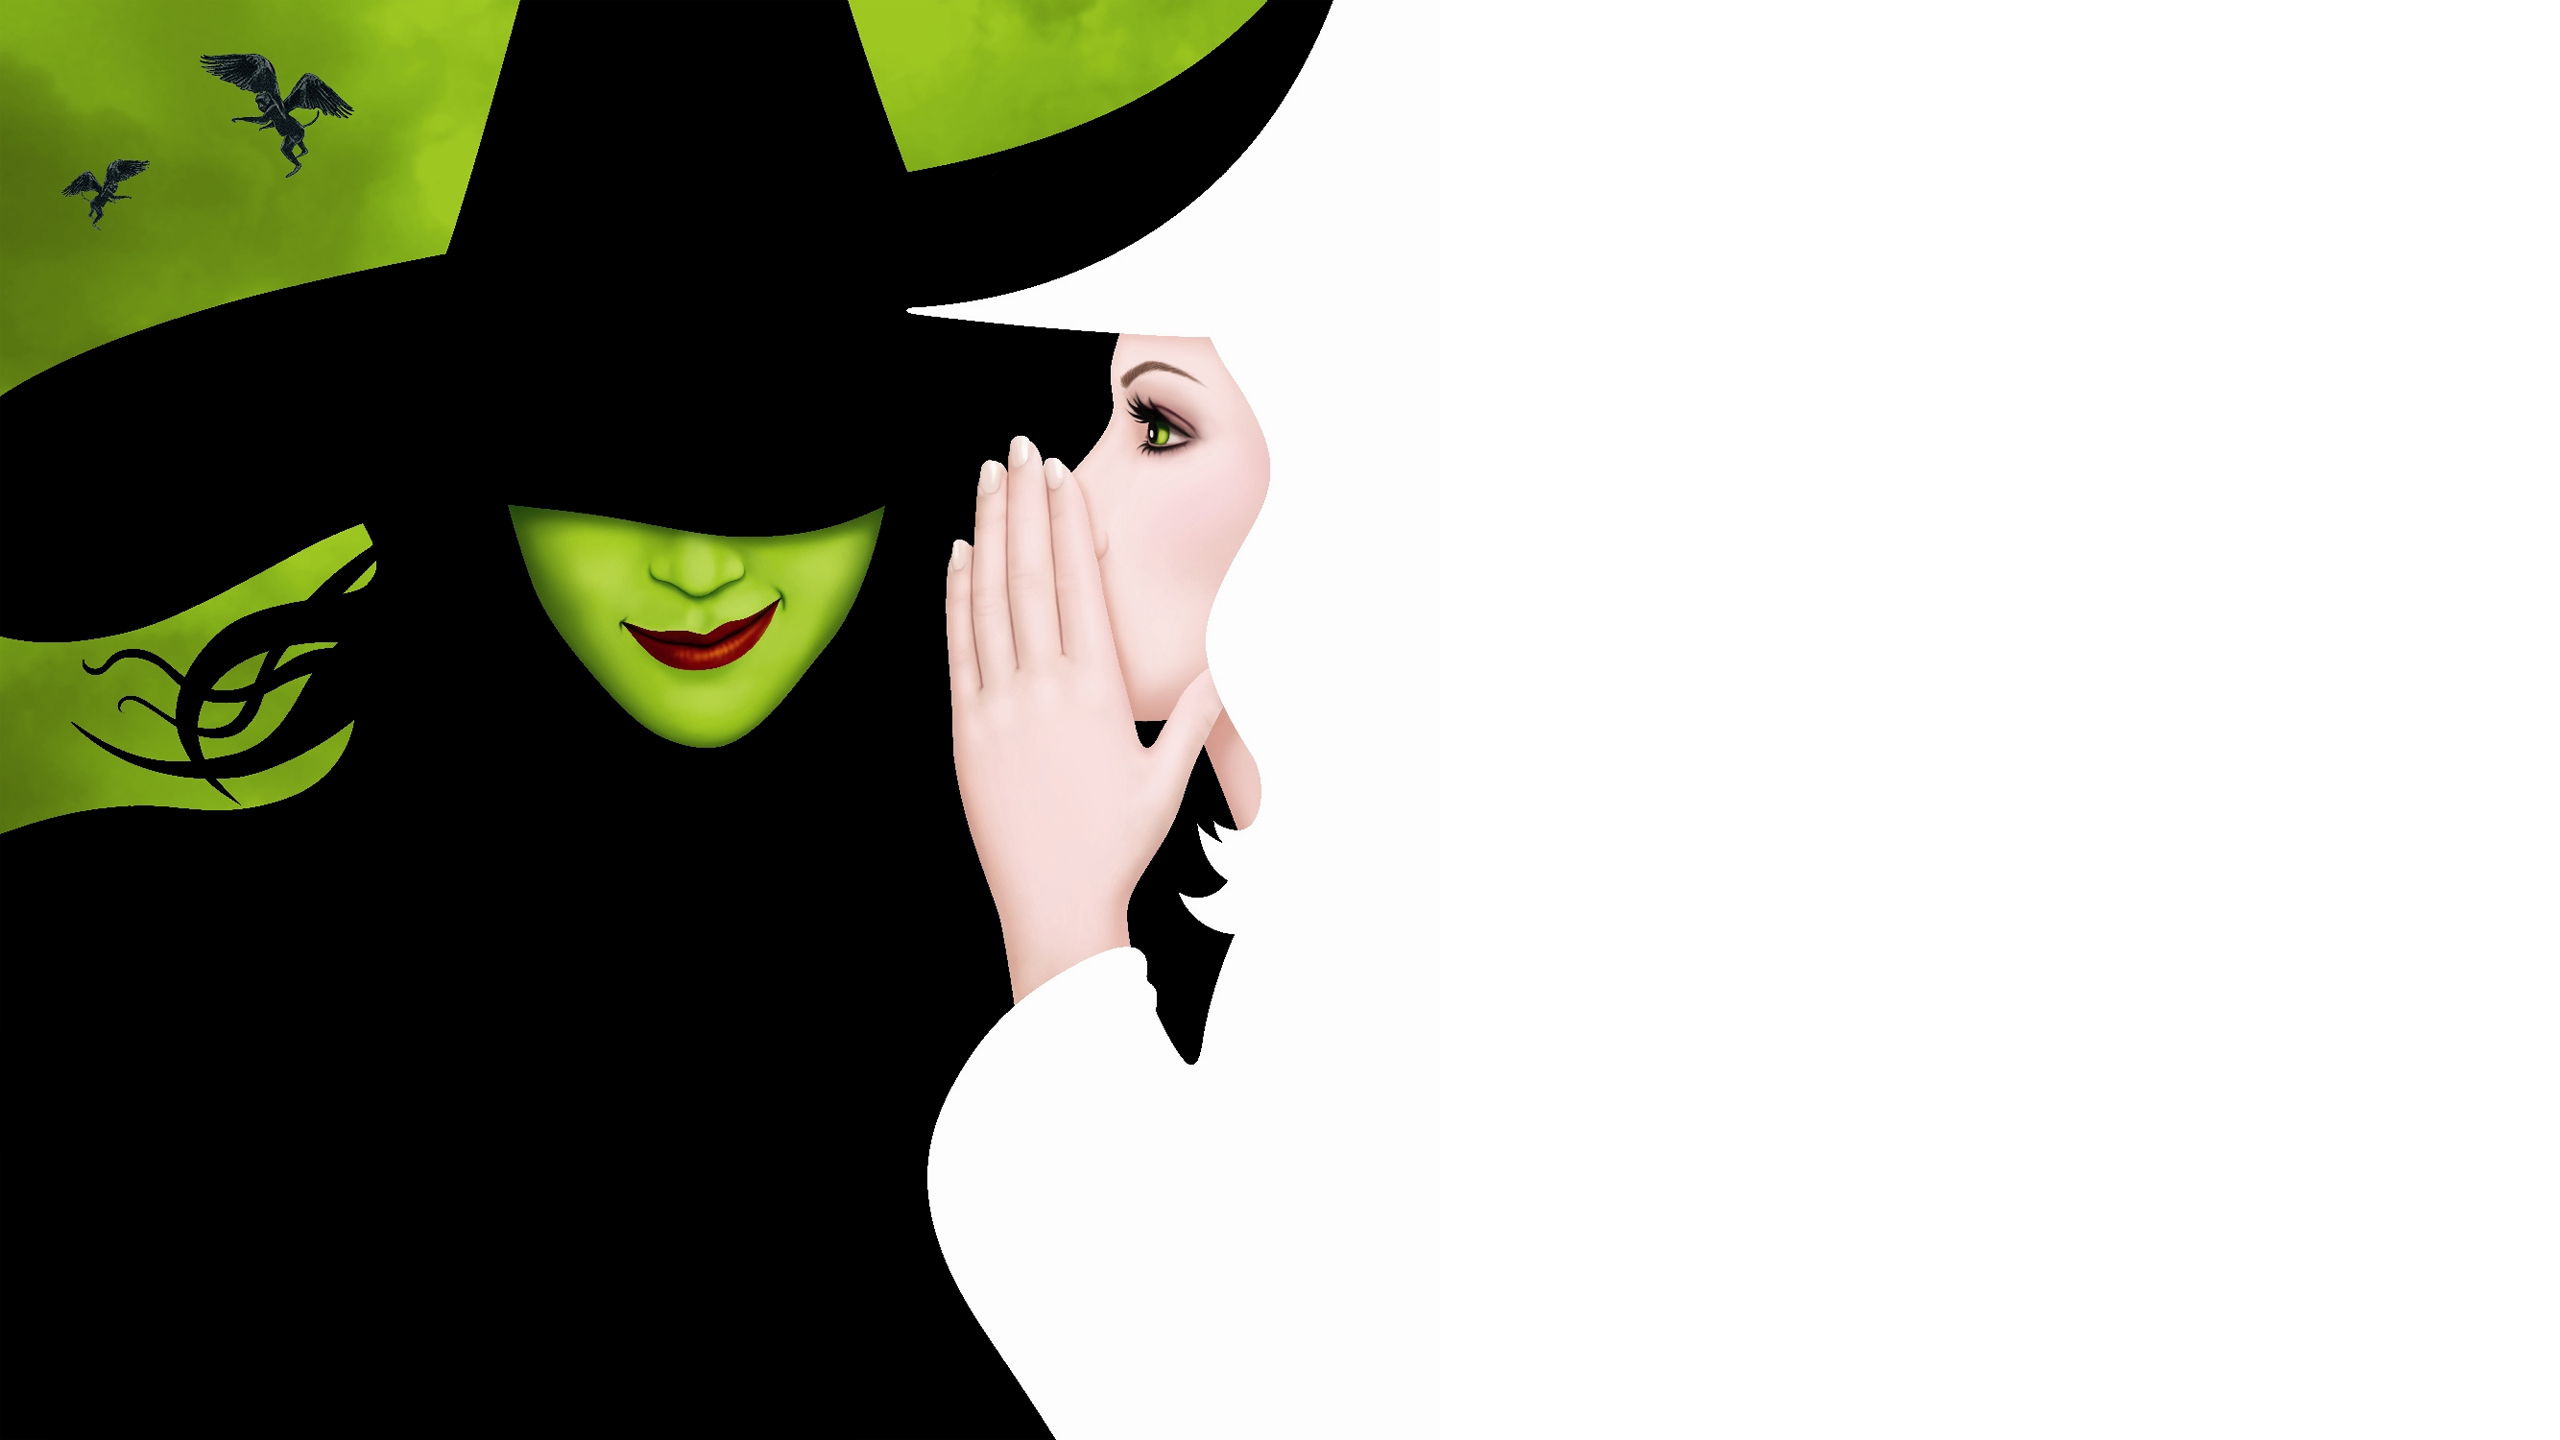 Free download Wicked Is A Broadway Musical HD Wallpaper Background Image [2560x1440] for your Desktop, Mobile & Tablet. Explore Wicked Musical Wallpaper. Wicked Musical Wallpaper Desktop, Wicked Wallpaper, Musical Background